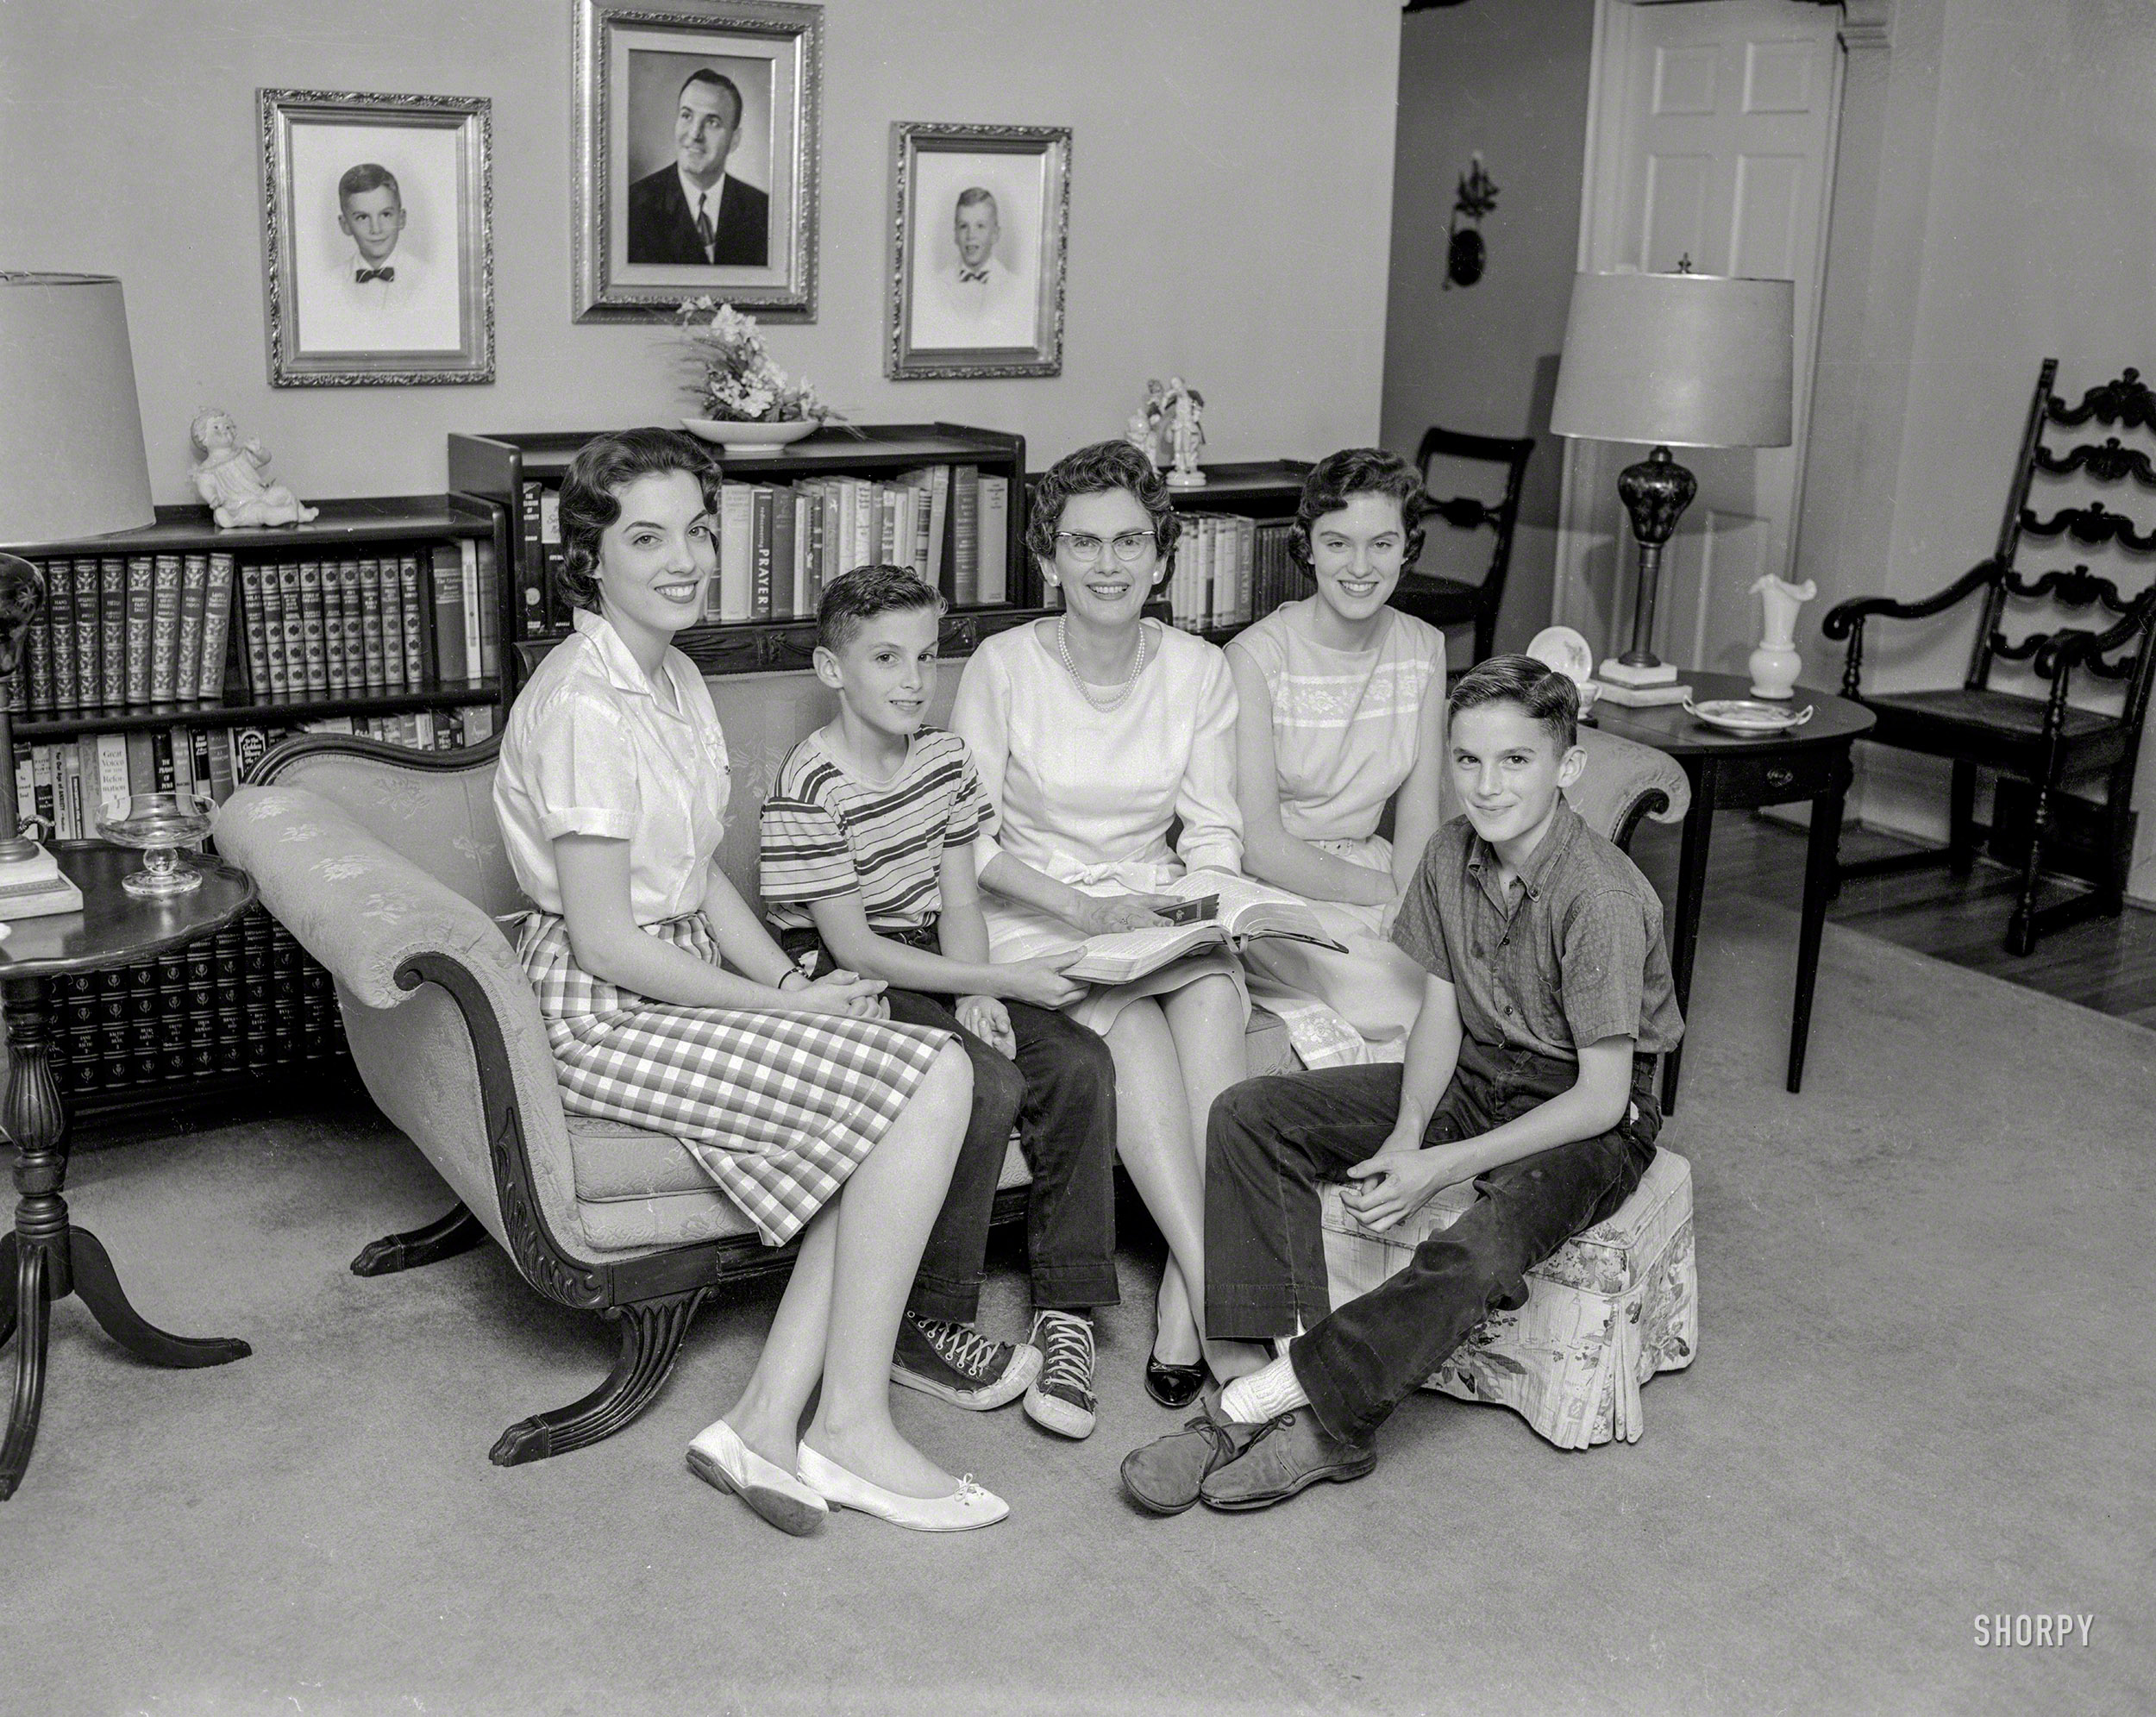 From circa 1960 comes this uncaptioned News Archive photo of a family whose reading would seem to favor religious and inspirational titles, chief among them the Bible in Mother's lap. 4x5 acetate negative. View full size.